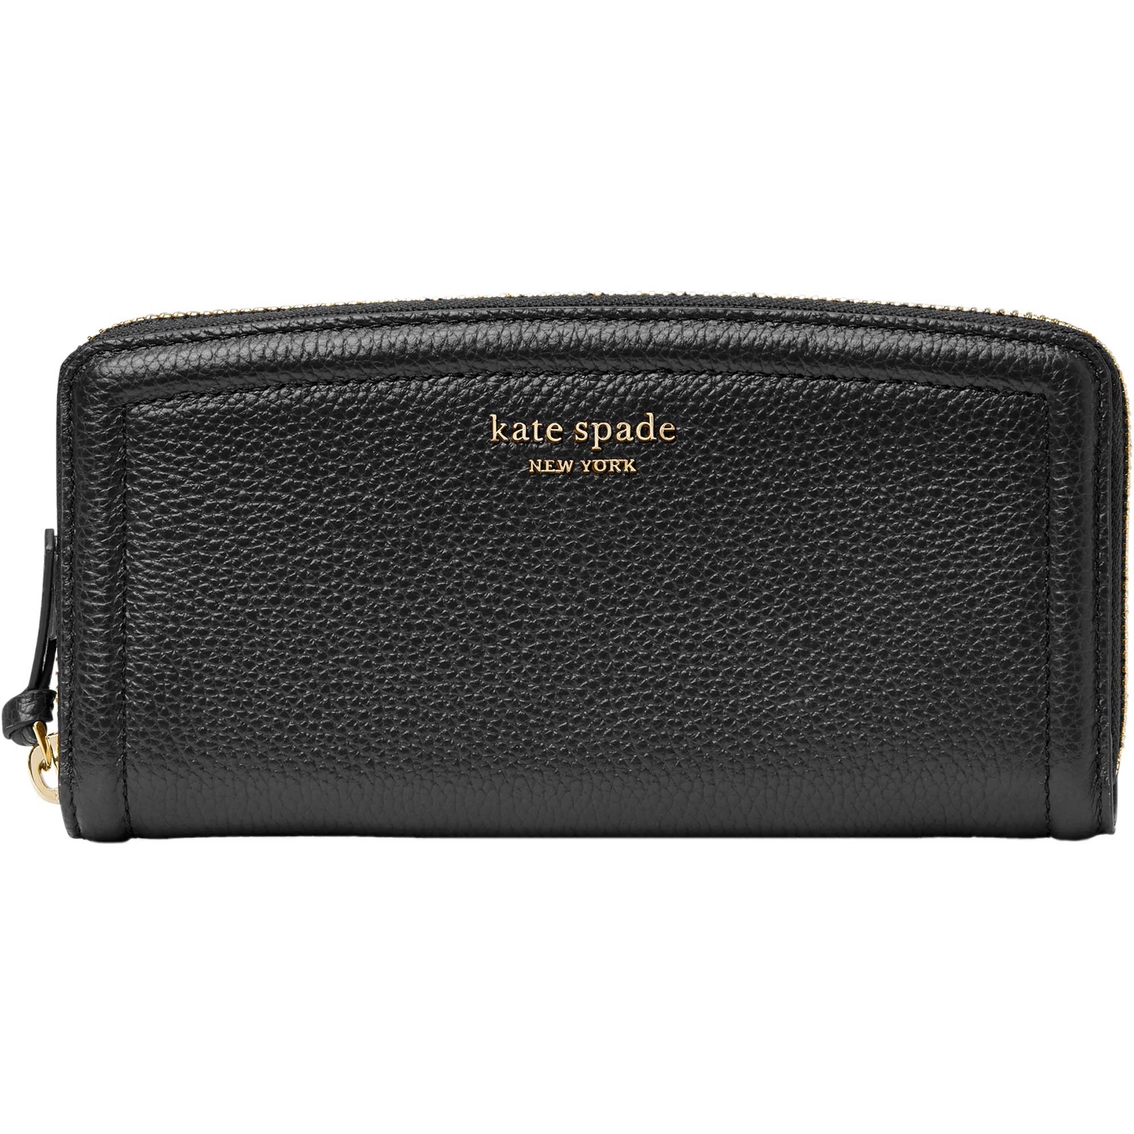 Kate Spade New York Knott Pebbled Leather Slim Continental Wallet ...